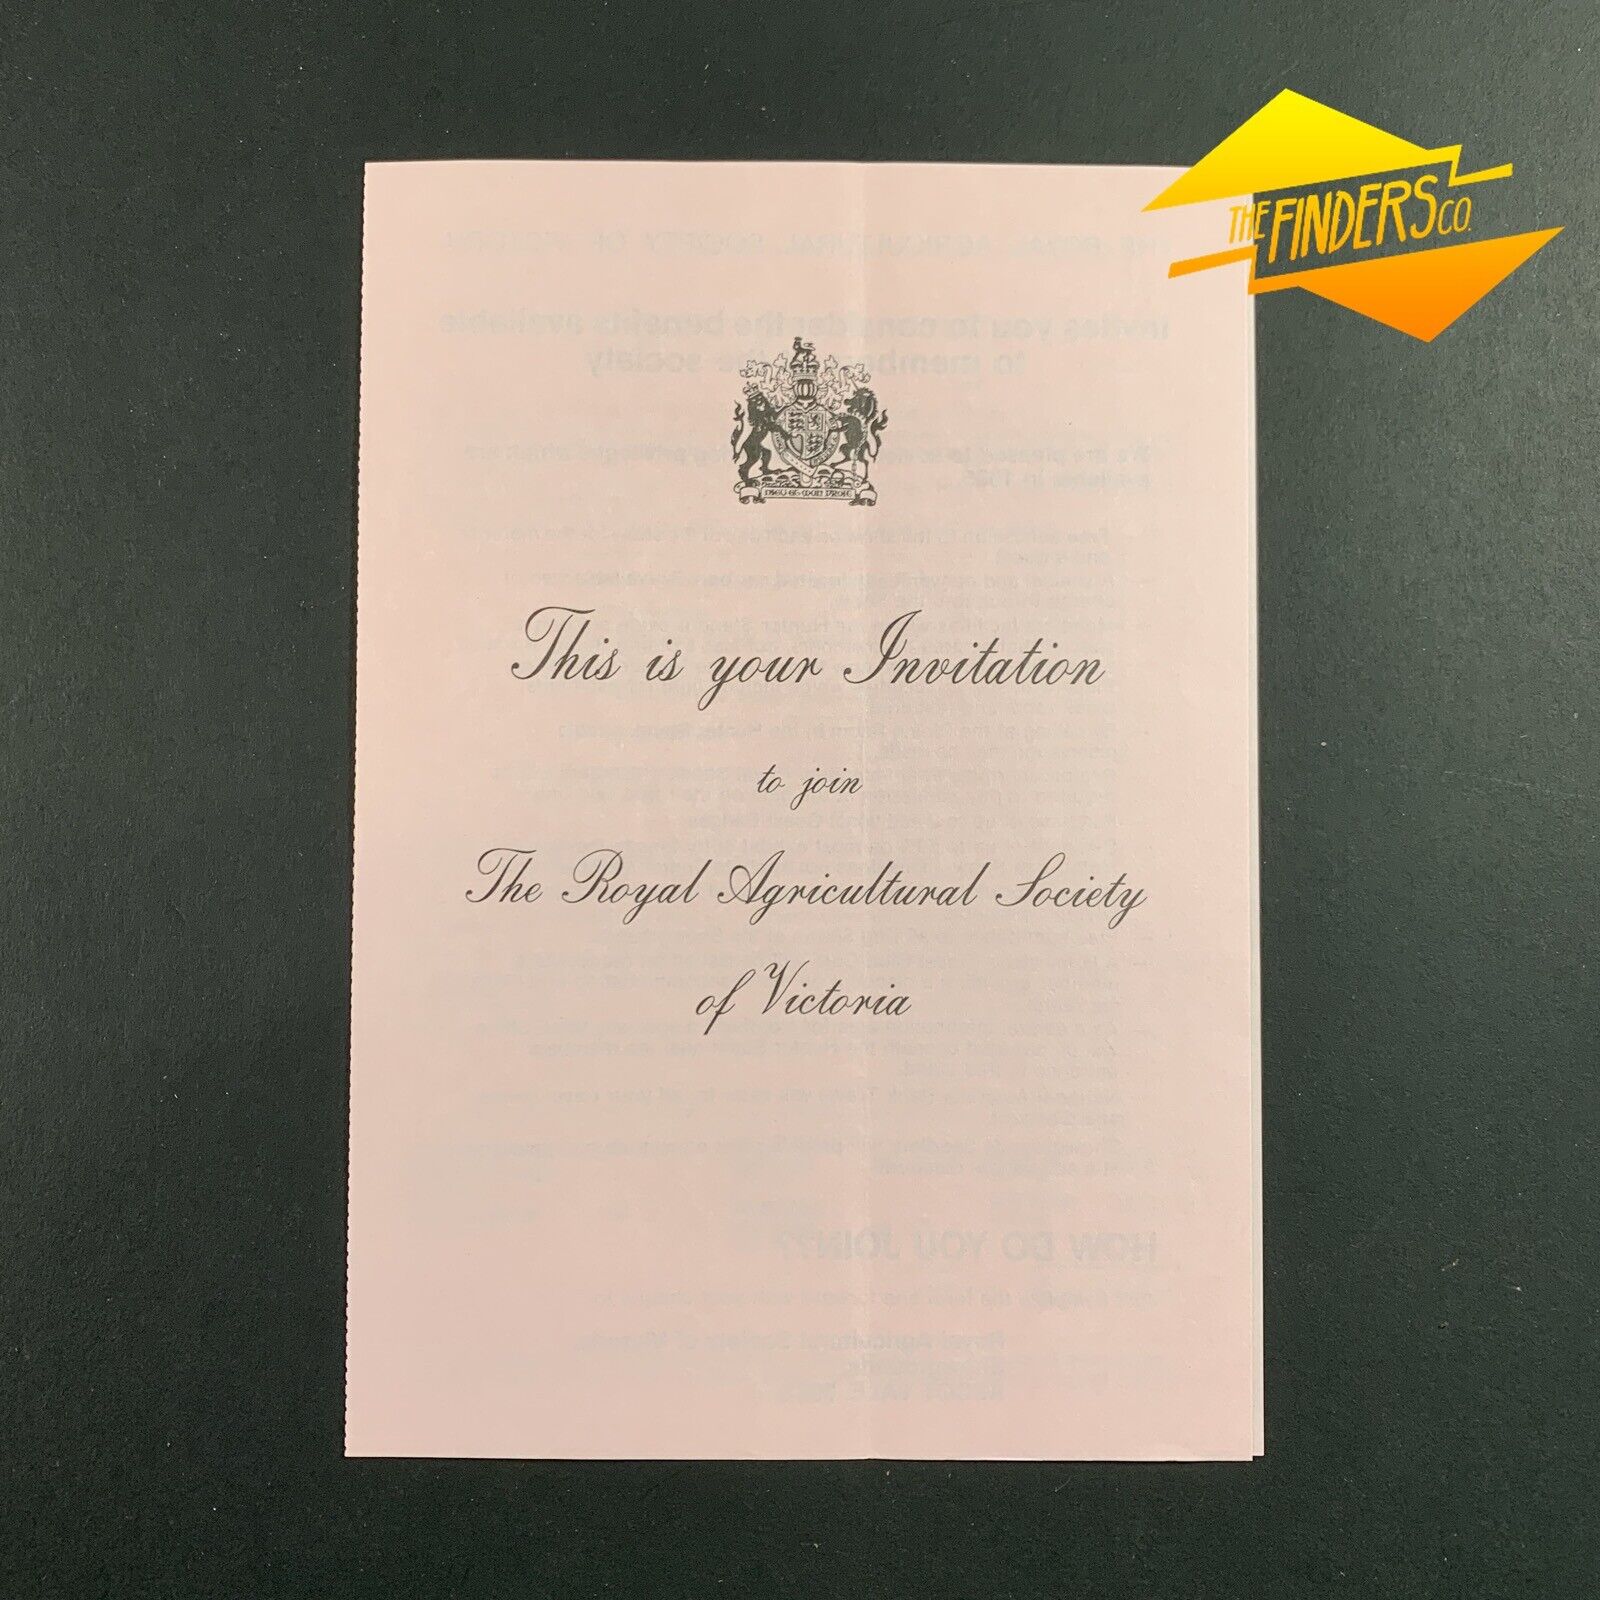 VINTAGE 1985 INVITATION TO JOIN THE ROYAL AGRICULTURAL SOCIETY OF VICTORIA 